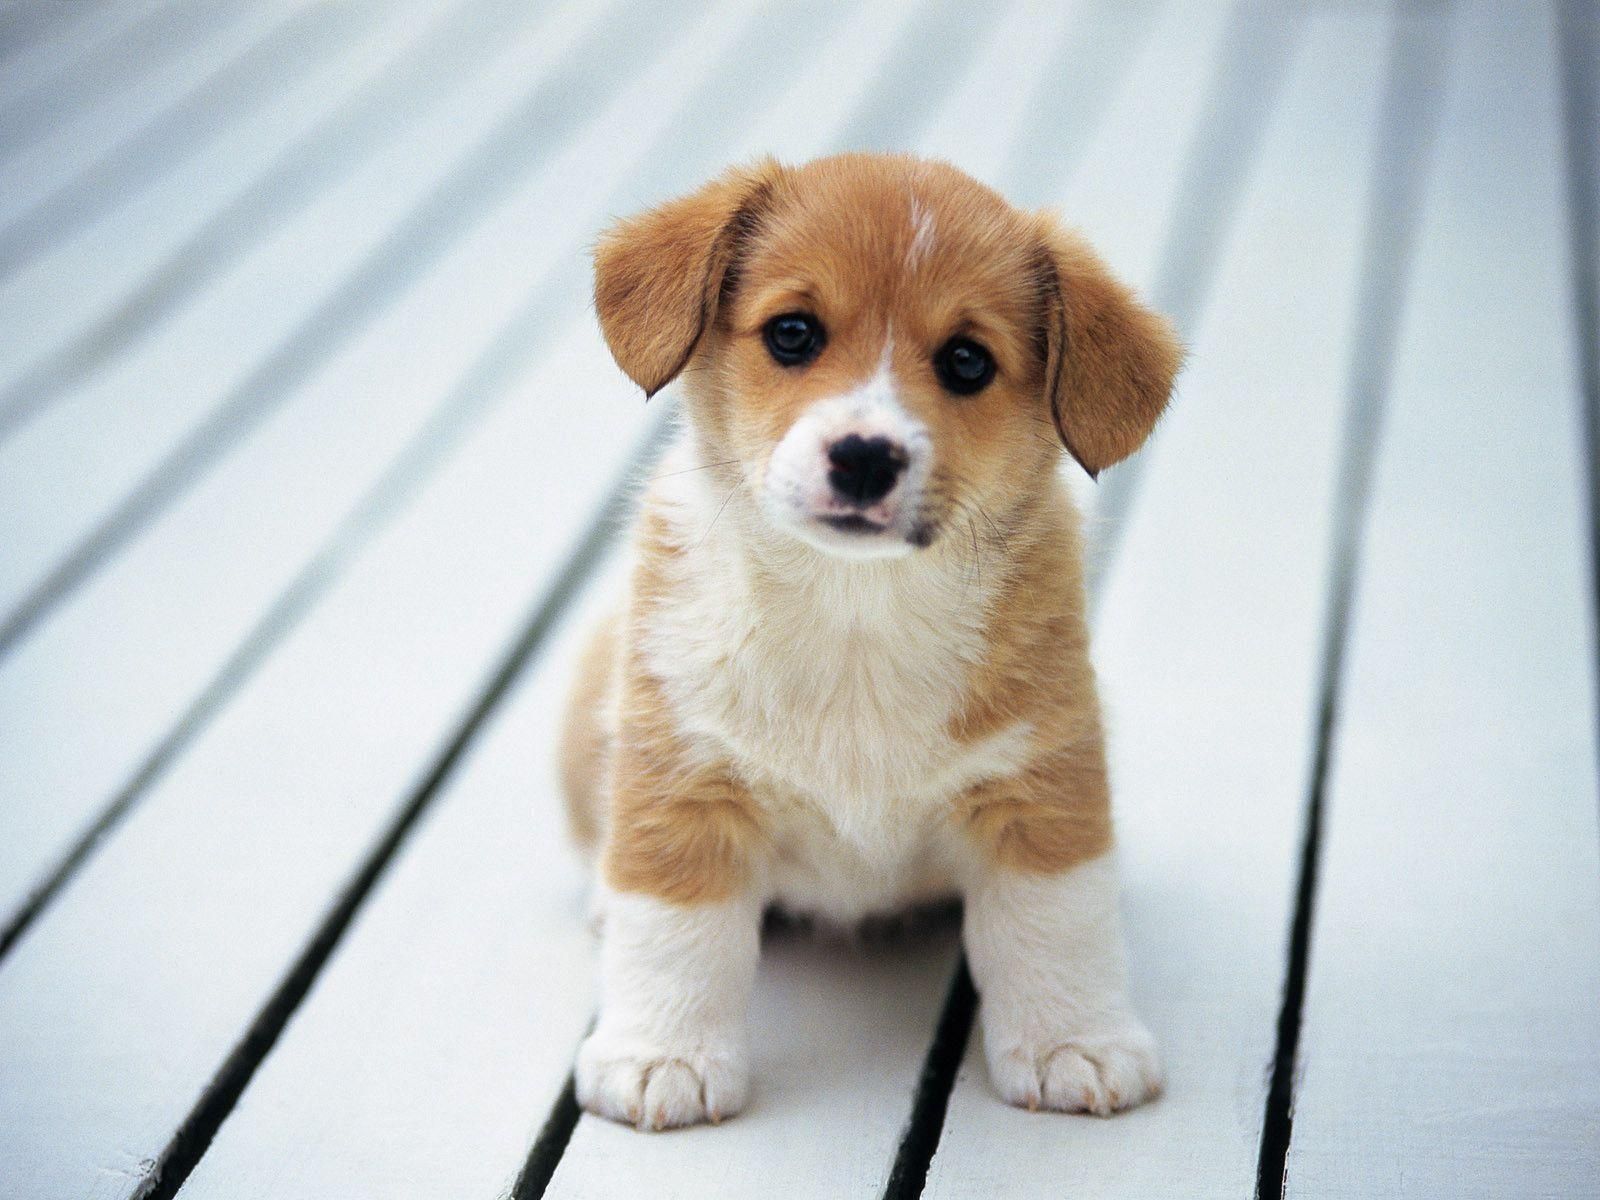 Free 图片s For Mobile Phonesfree Cute Puppies 图片Background For Mobiles  Slzadgcb 图片s for Phones 照片从Darell  照片图像图像